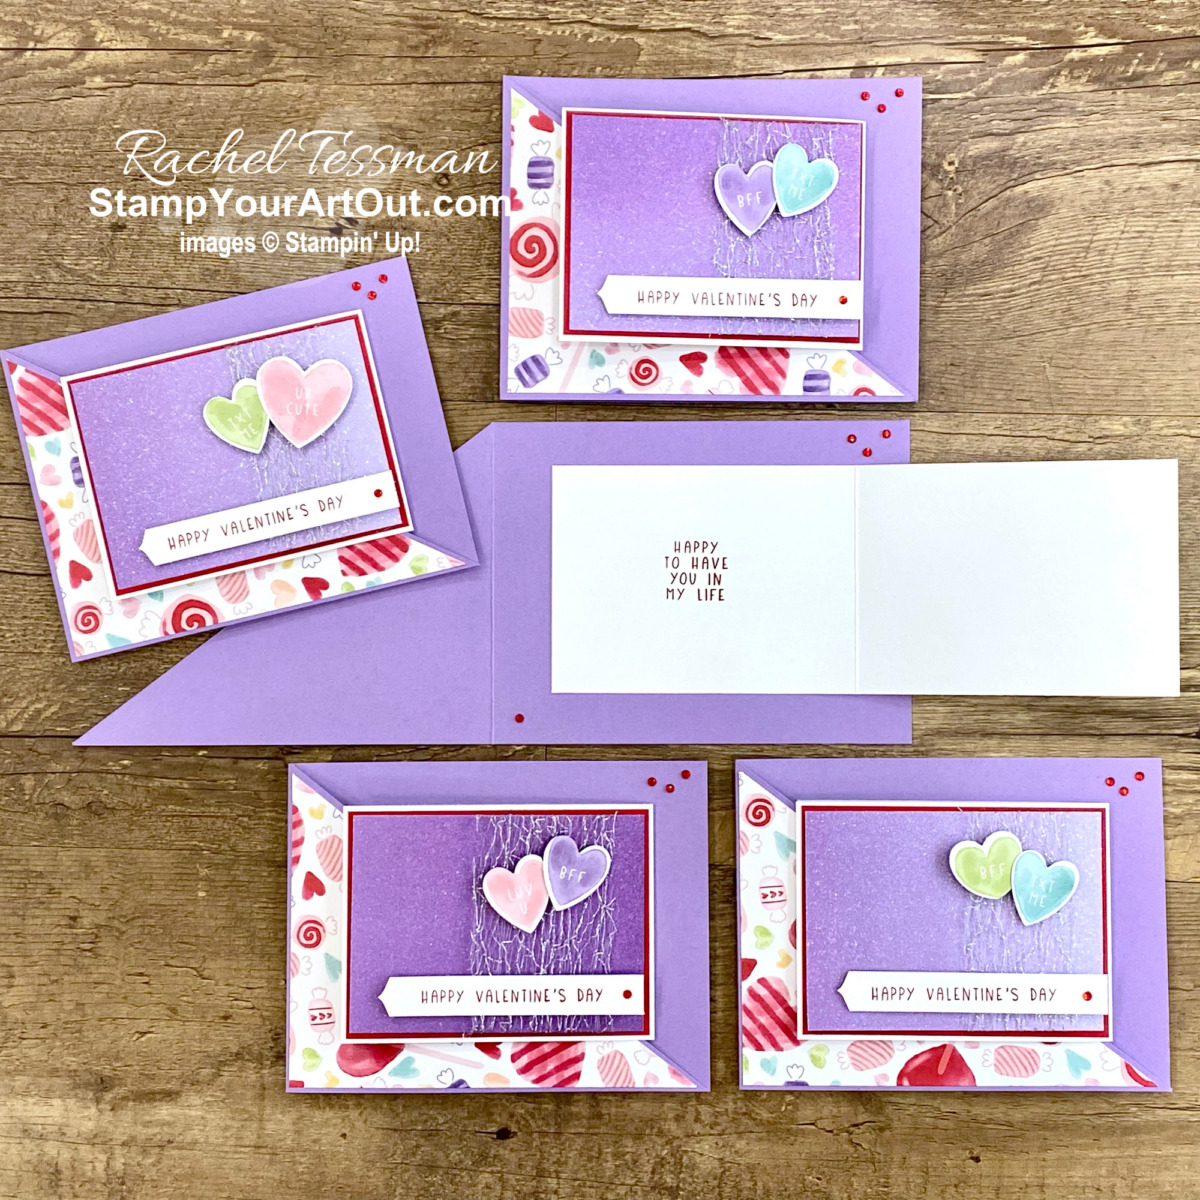 Click here to see how to make a Diagonal Joy Fold Card using the new Sweet Talk products: Sweet Talk Designer Paper, Sweet Conversations Stamp Set, Sweet Heart Dies, Silver Metallic Mesh Ribbon, and the Gorgeous Grape Ombré Specialty Glimmer Paper. Access more photos, measurements, tips, and a supply list by clicking here. Stampin’ Up!® - Stamp Your Art Out! www.stampyourartout.com